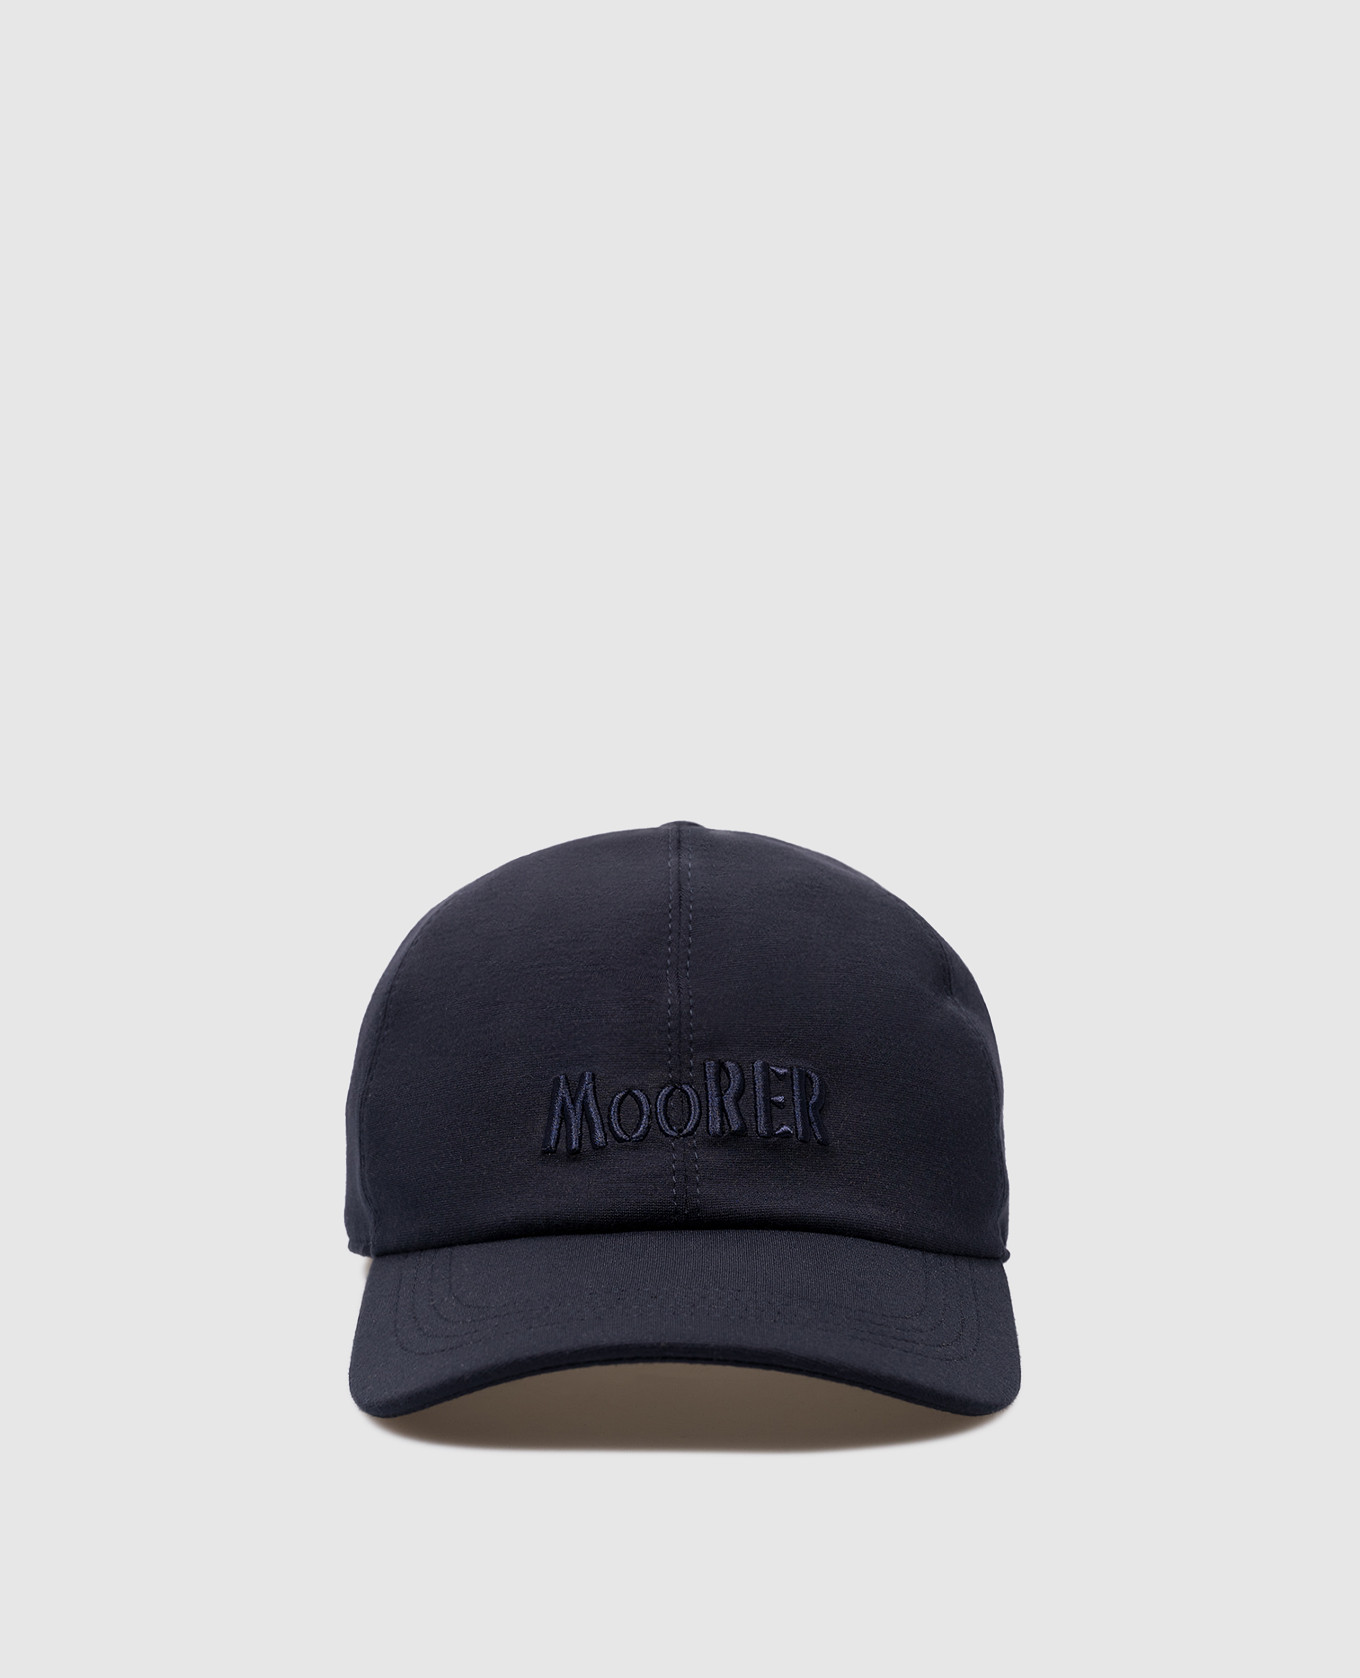 ROBINSON blue cap with logo embroidery